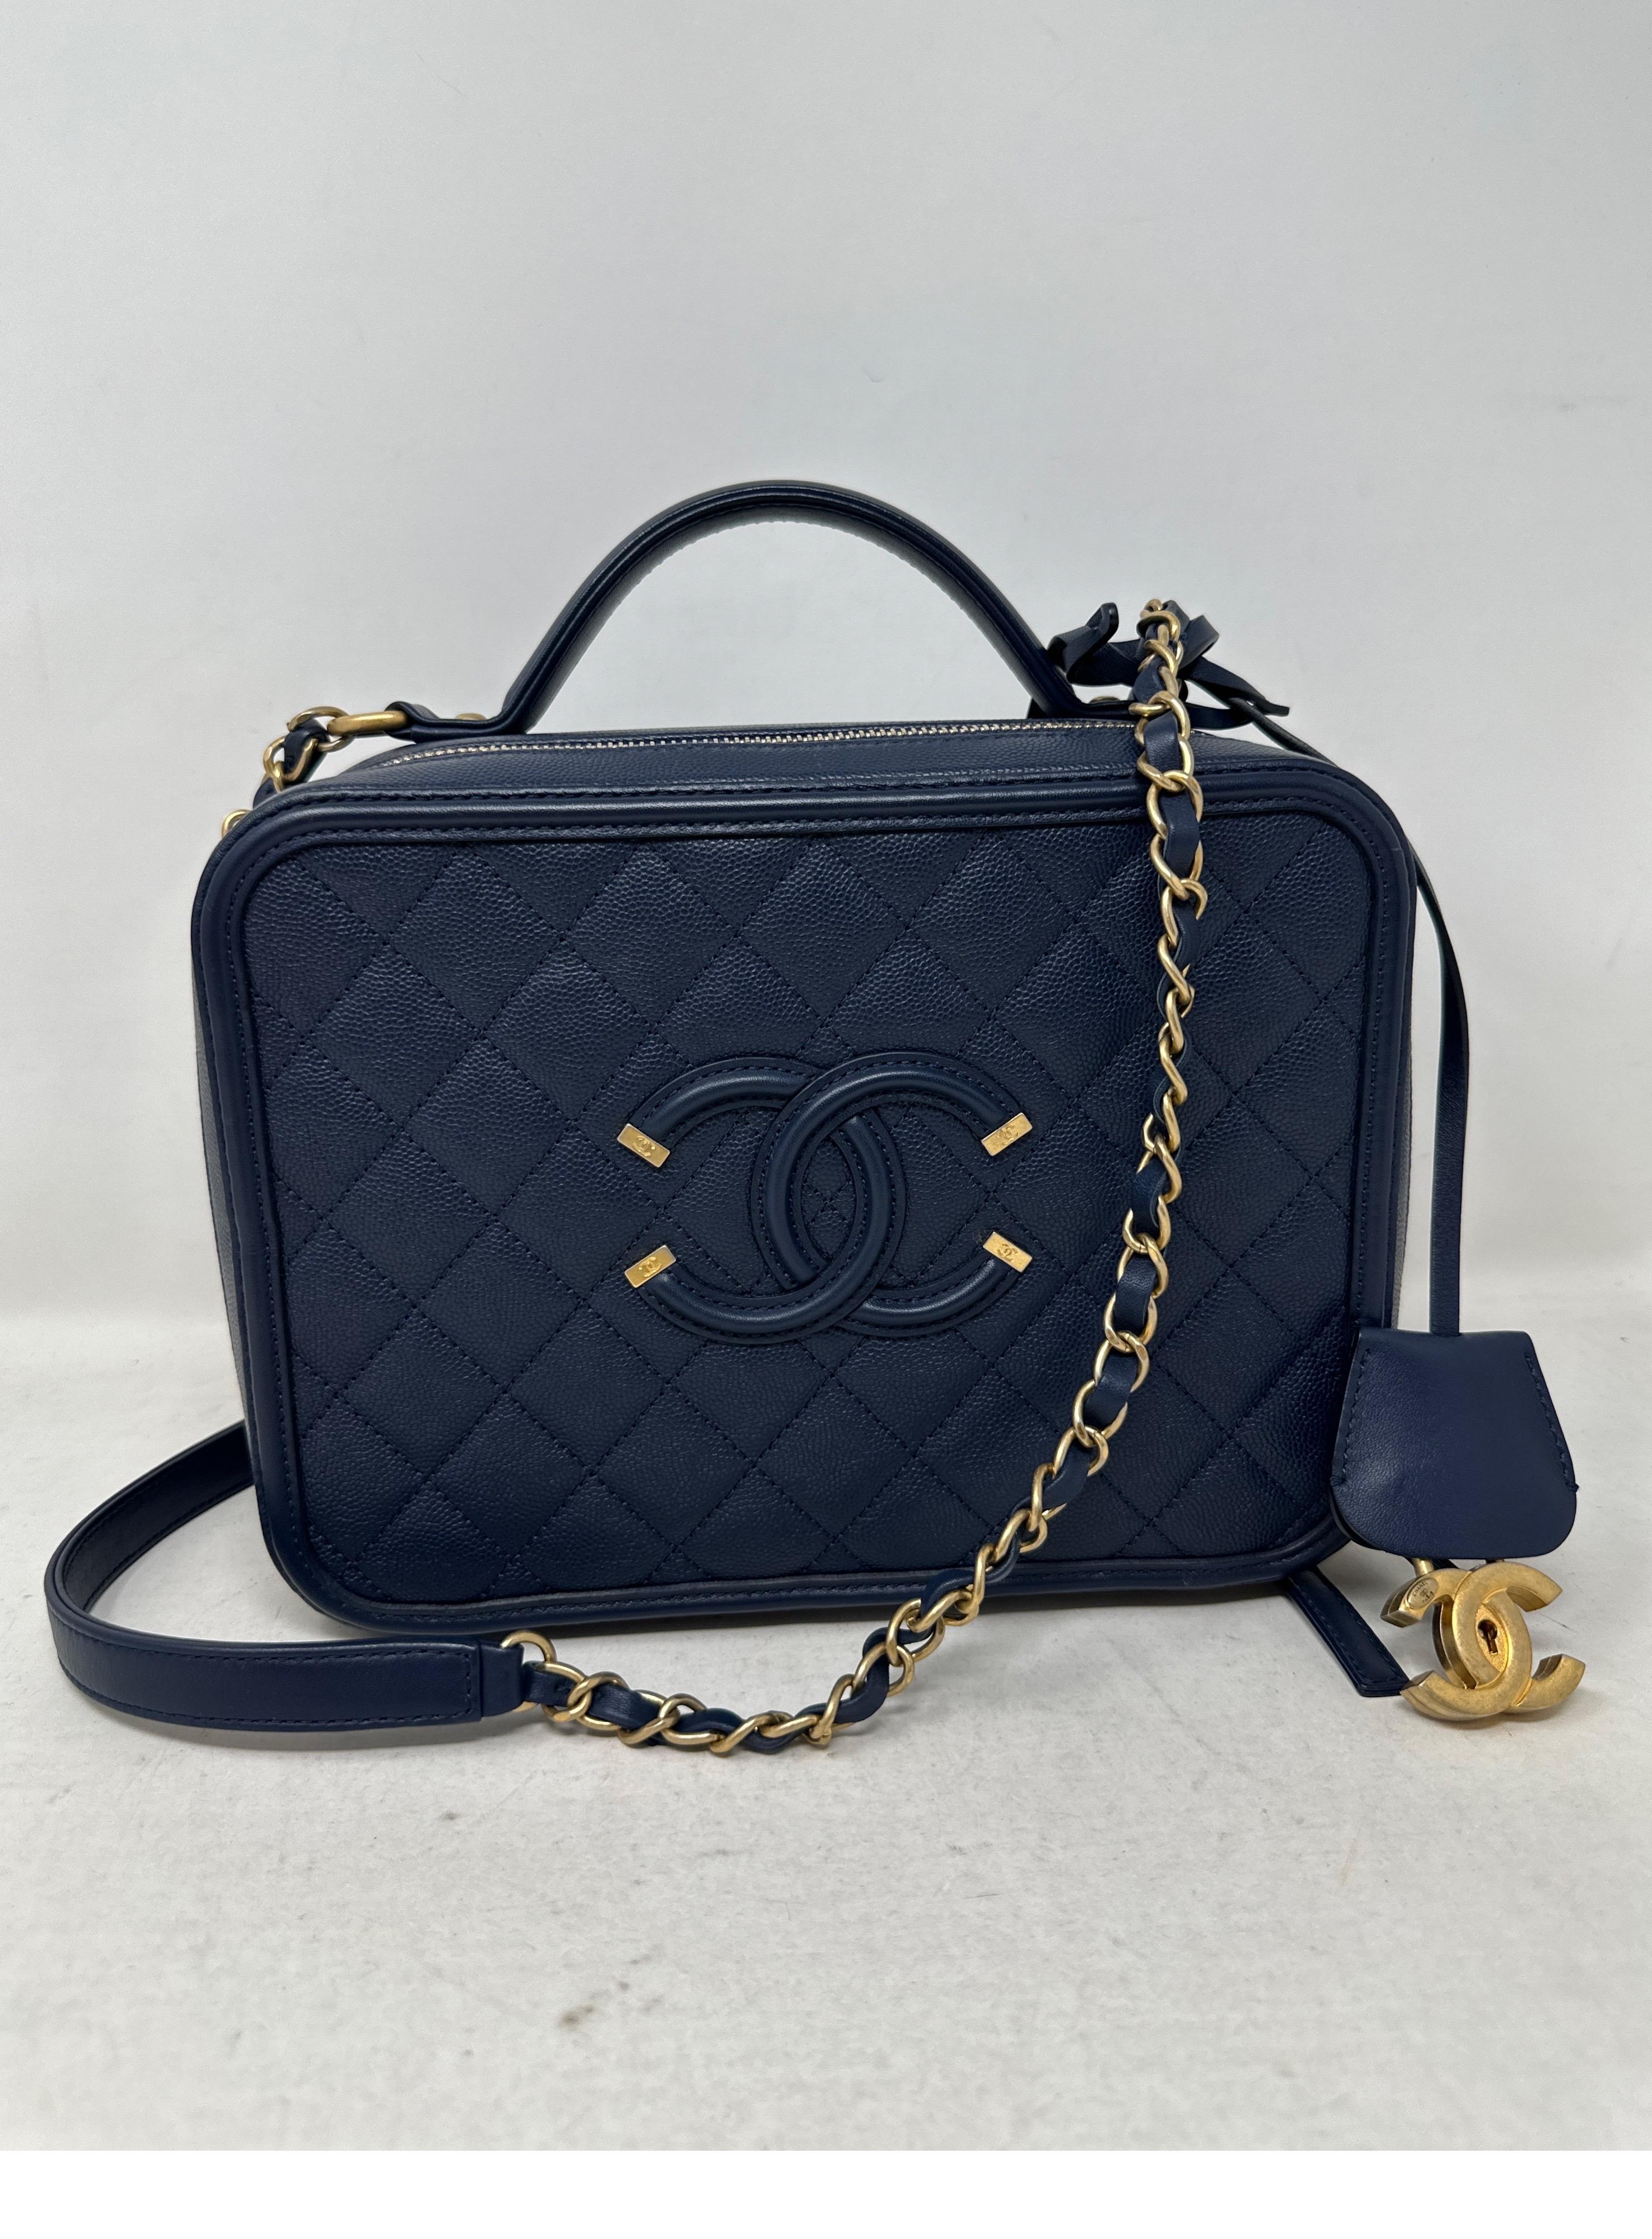 Chanel Navy Vanity Bag. Excellent condition like new. Caviar navy leather bag. Gold hardware. Can be worn as a shoulder bag or a top handle bag. Interior clean. Serial number is intact. Includes dust bag and box. Guaranteed authentic. 